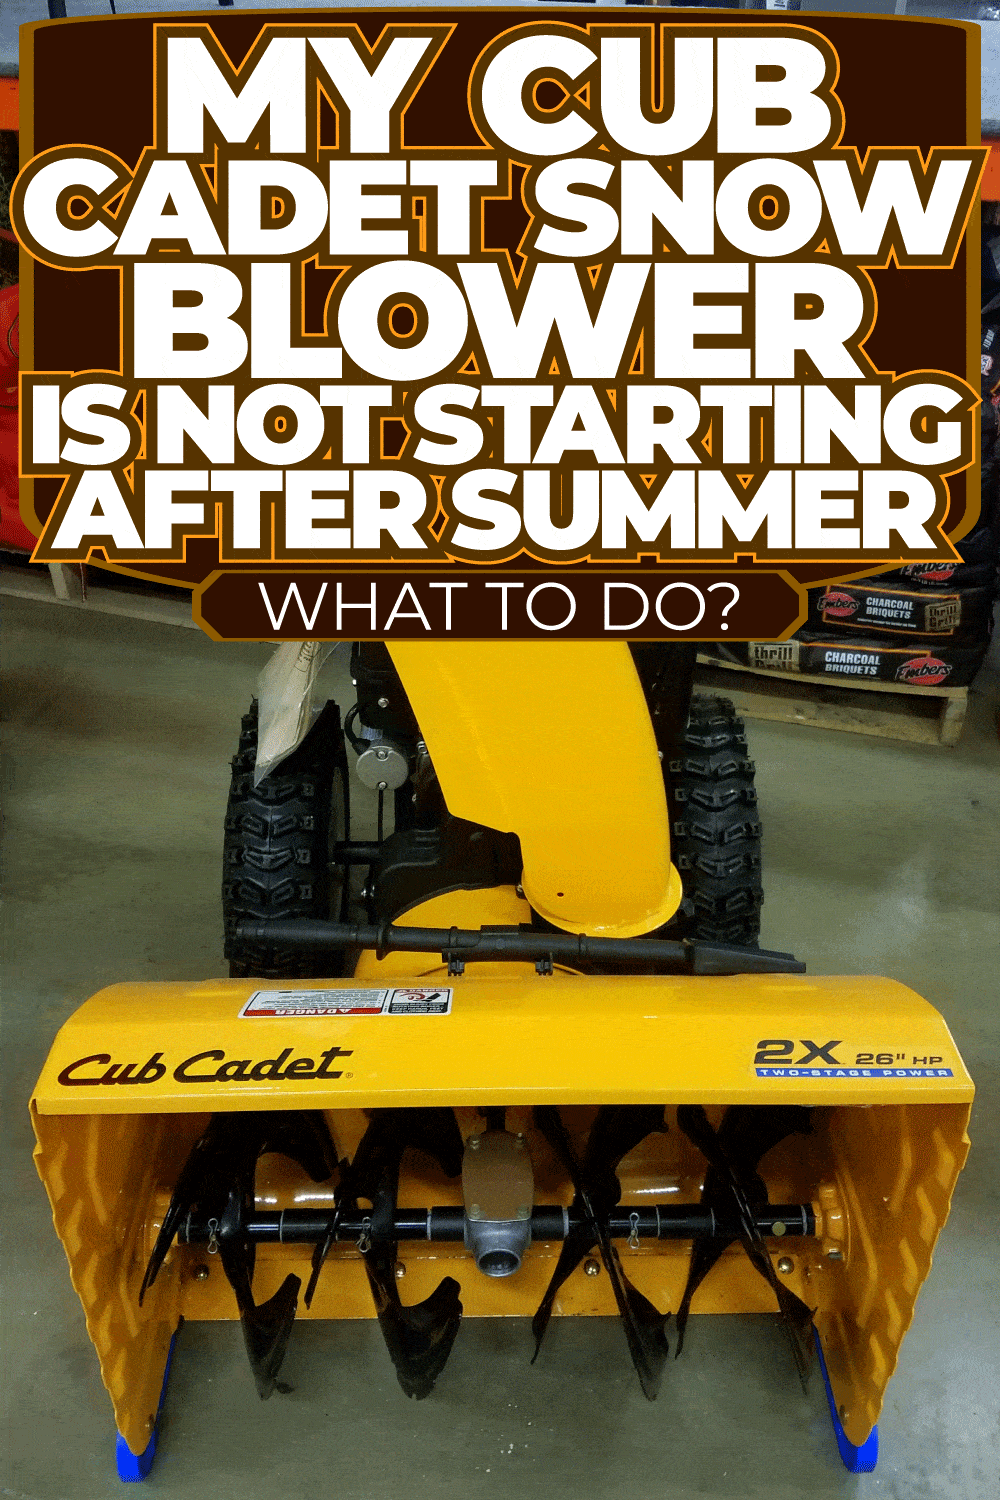 My Cub Cadet Snow Blower Is Not Starting After Summer – What To Do